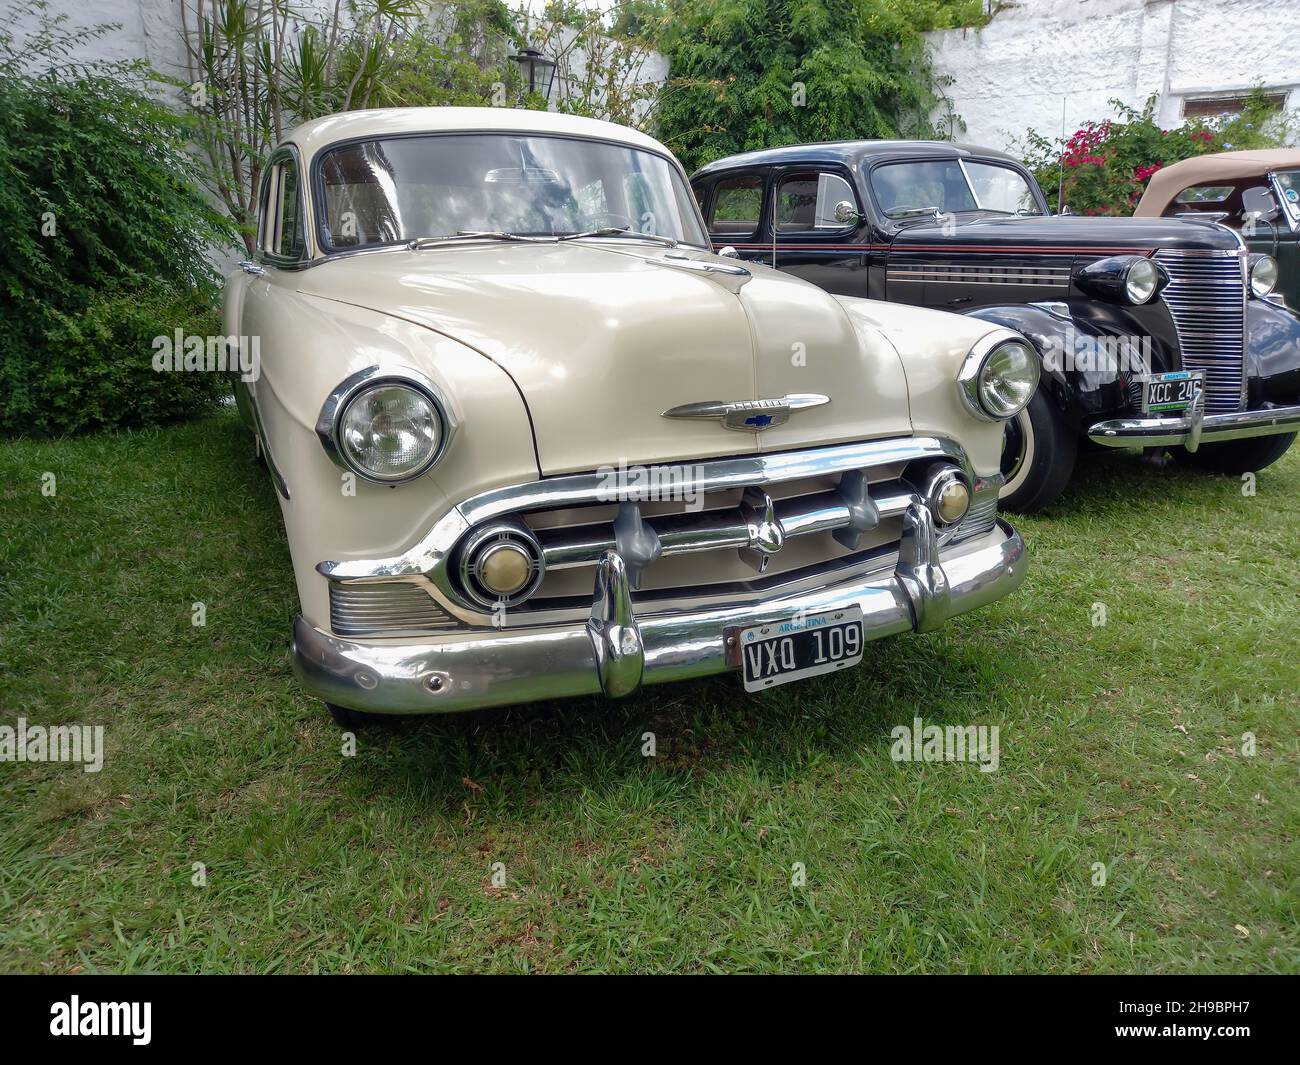 LOMAS DE ZAMORA - BUENOS AIRES, ARGENTINA - Dec 05, 2021: shot of an old American Chevrolet Chevy Bel Air four door sedan 1953 by GM. Front view. CADE Stock Photo